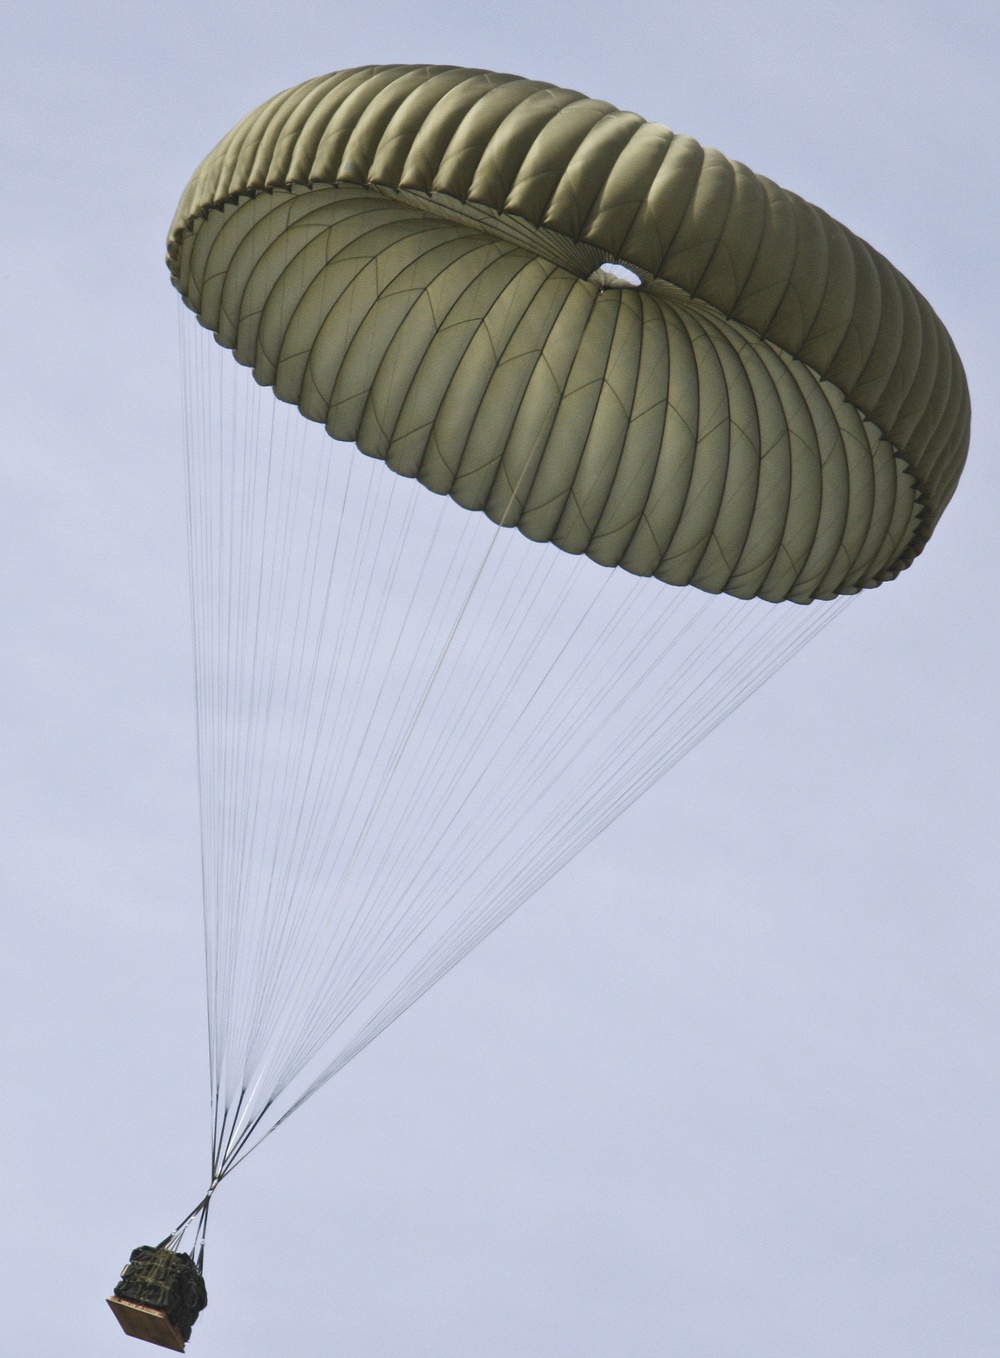 Arctic paratroopers conduct Operation Spartan Reach